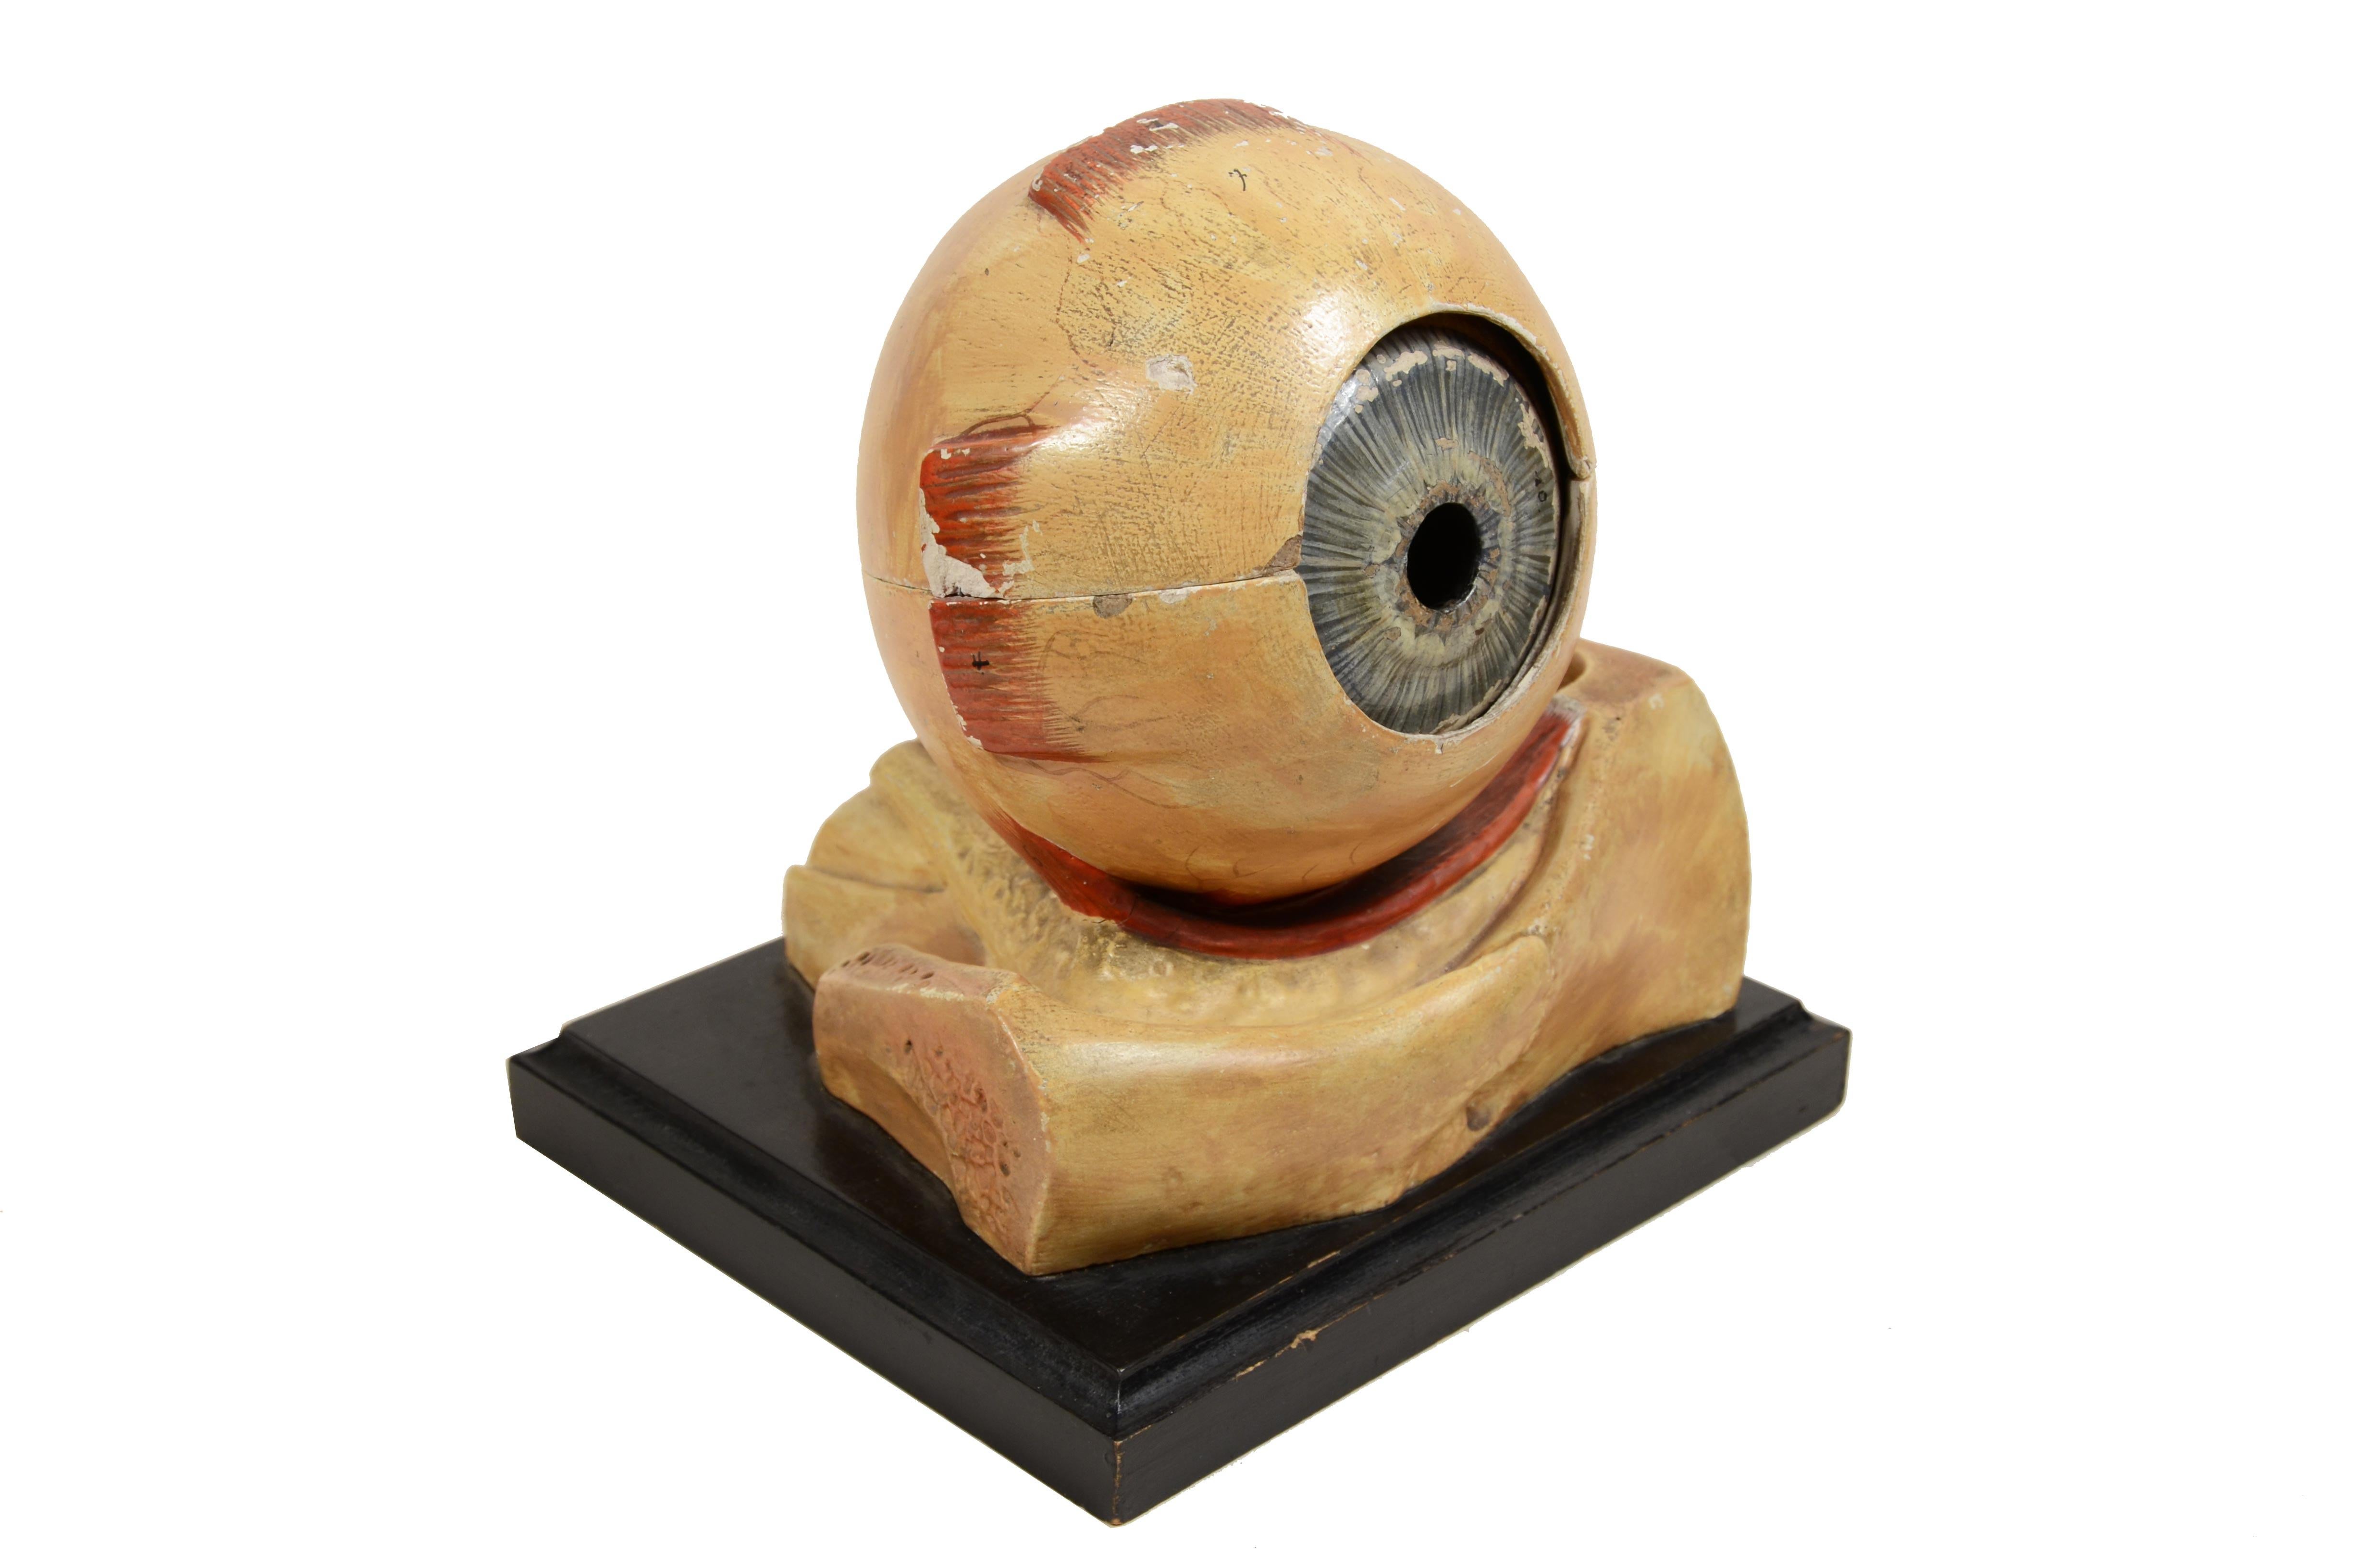 Anatomical teaching model made of plaster cast paper and glass  of the human eye fully disassembled, mounted on ebonized wooden board. French manufacture of the late 19th century. The model shows the structures of the eye and is hand-painted while 